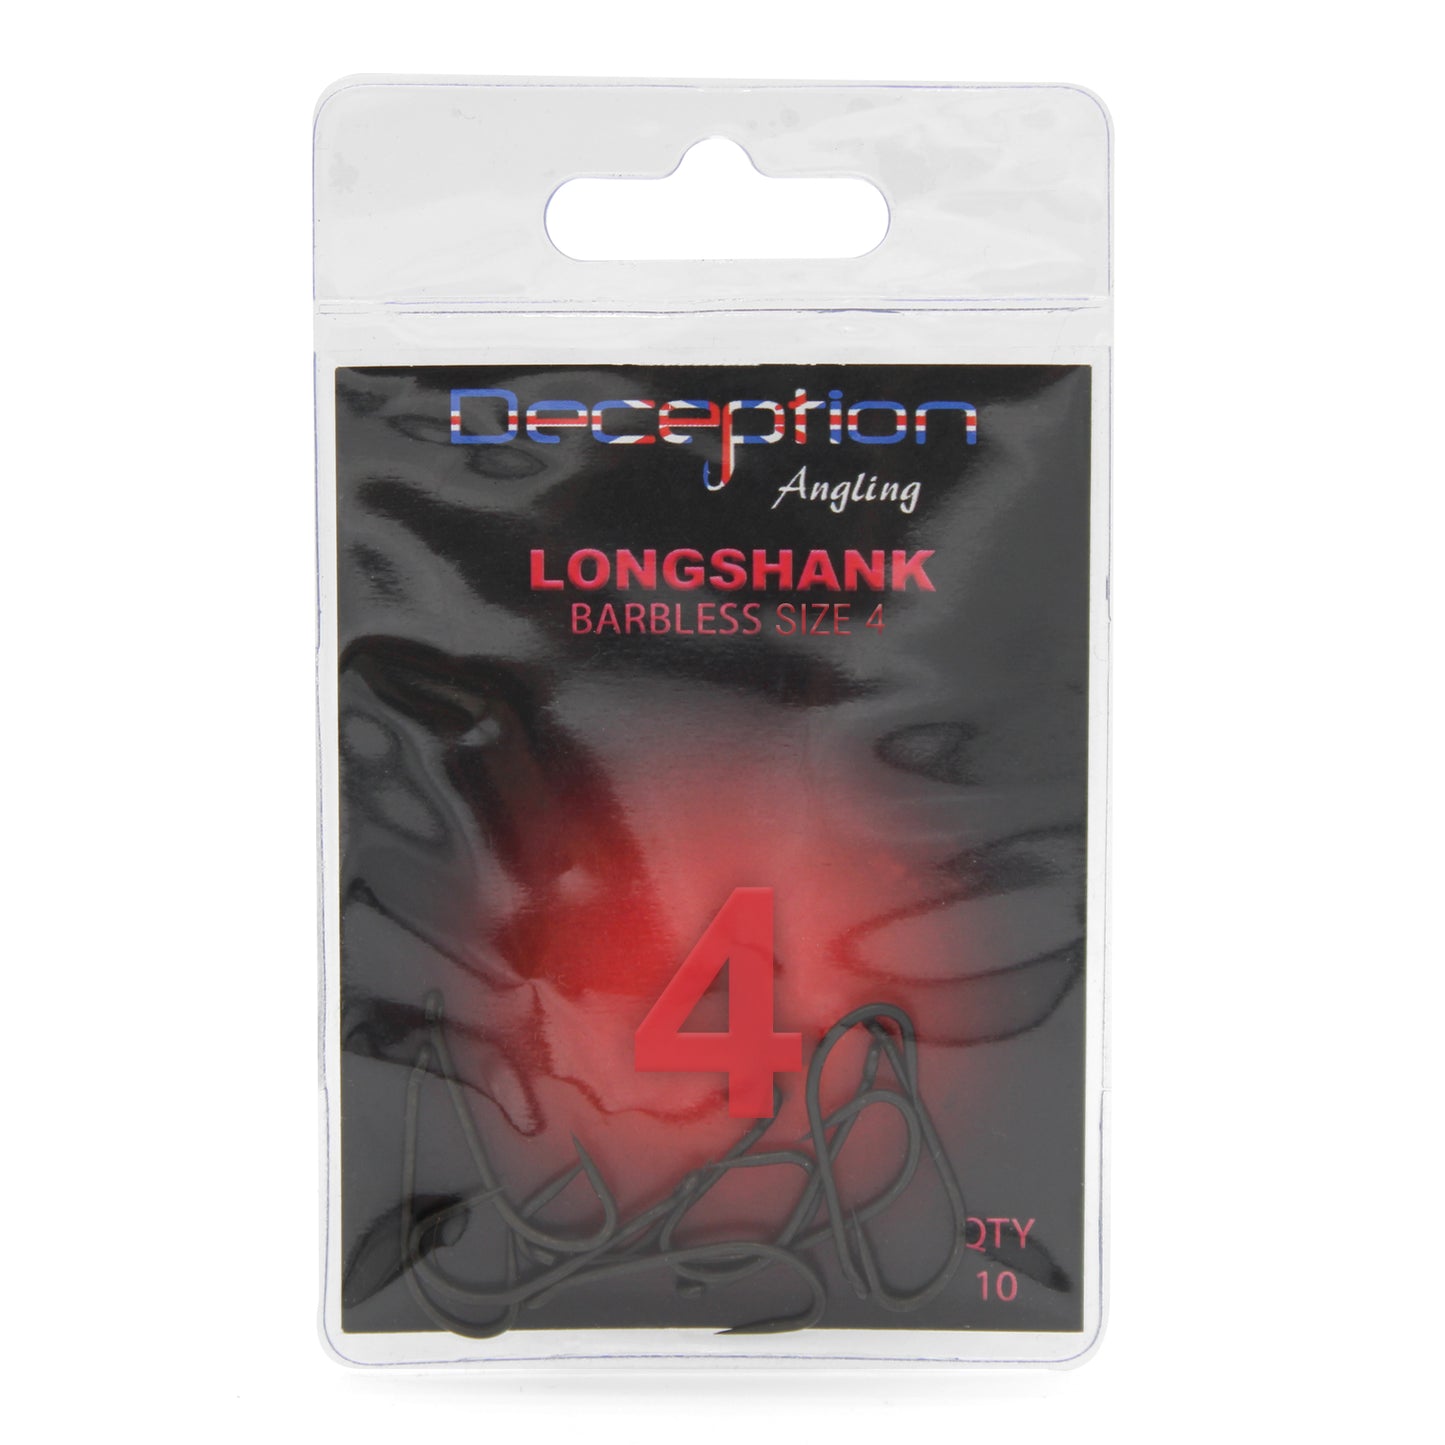 Deception Angling Long Shank Barbless Fishing Hooks Pack of 10 - Size 4